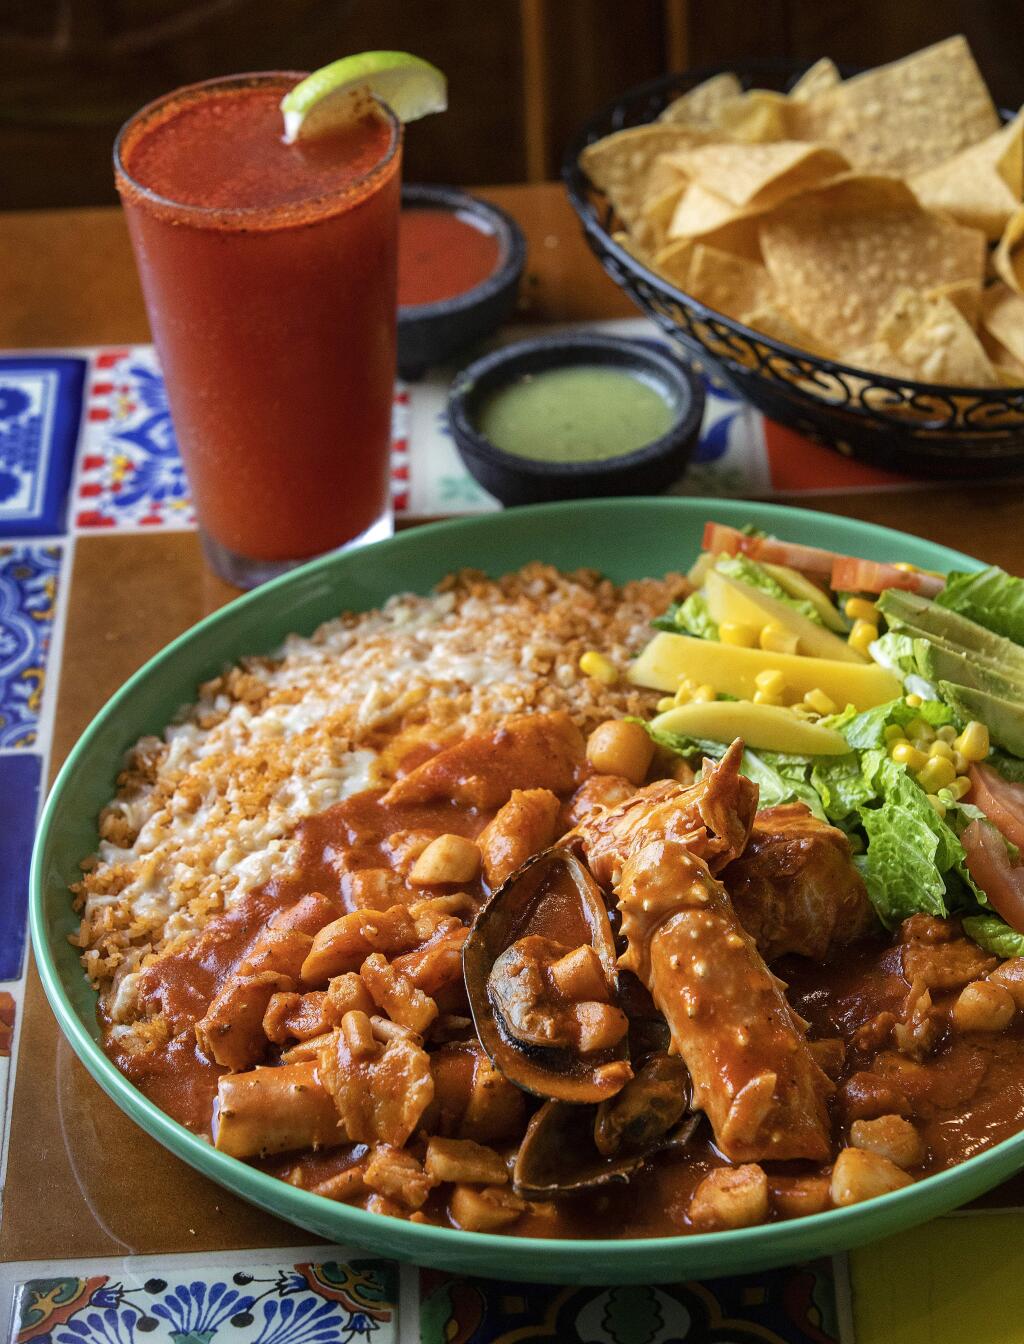 Mariscos Jarochos of prawns, octopus, scallops, crab legs, fish and green mussels in red sauce with a Michelada spiced beer from the La Hacienda Mexican Grill in Sonoma. (John Burgess/The Press Democrat)